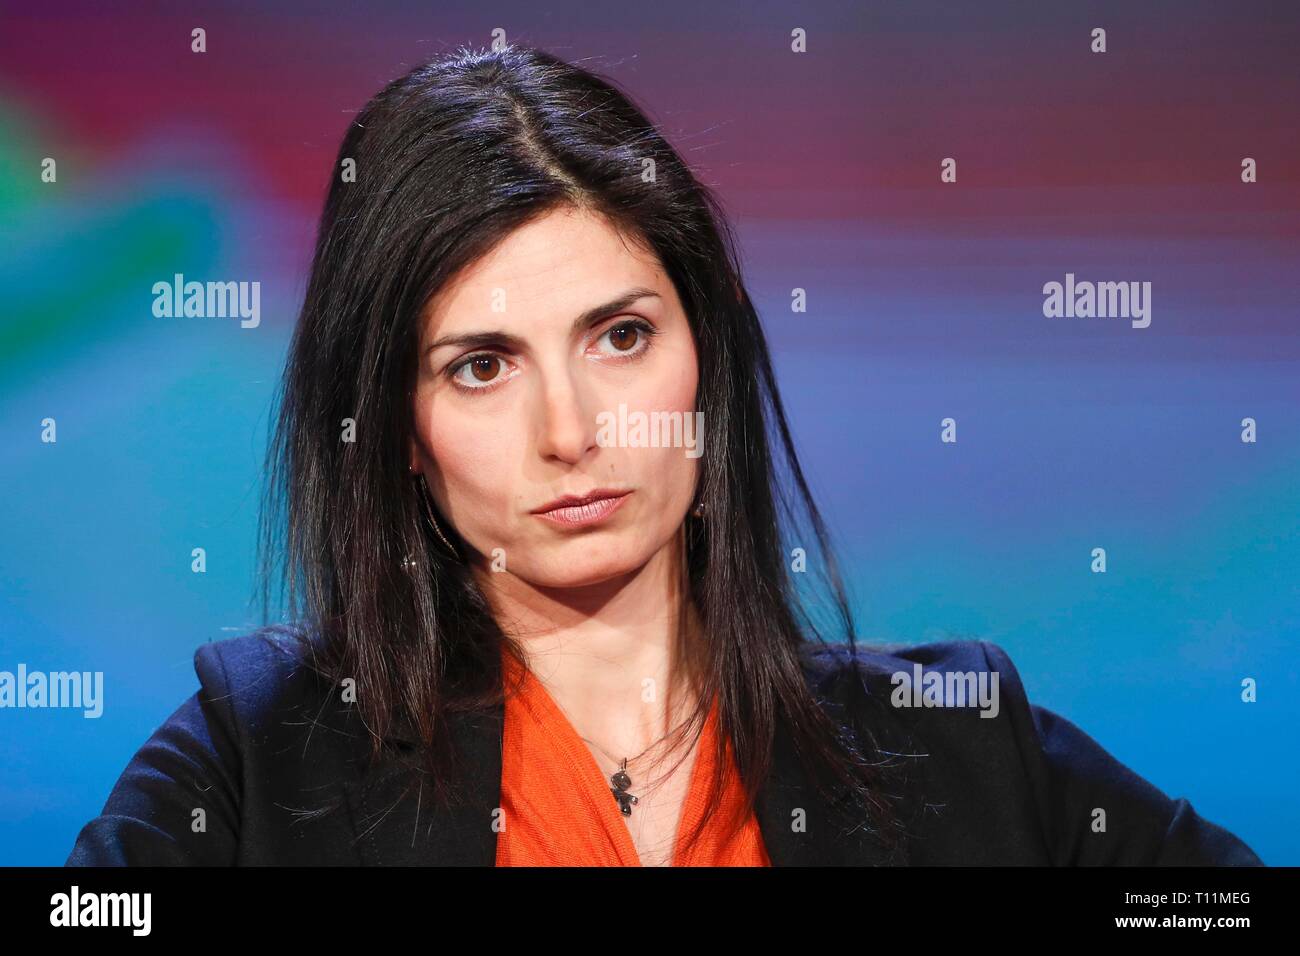 Italy, Rome, March 20, 2019 : Virginia Raggi, Mayor of Rome, during the talk show TV 'Porta a Porta', following the arrest for corruption of the Presi Stock Photo